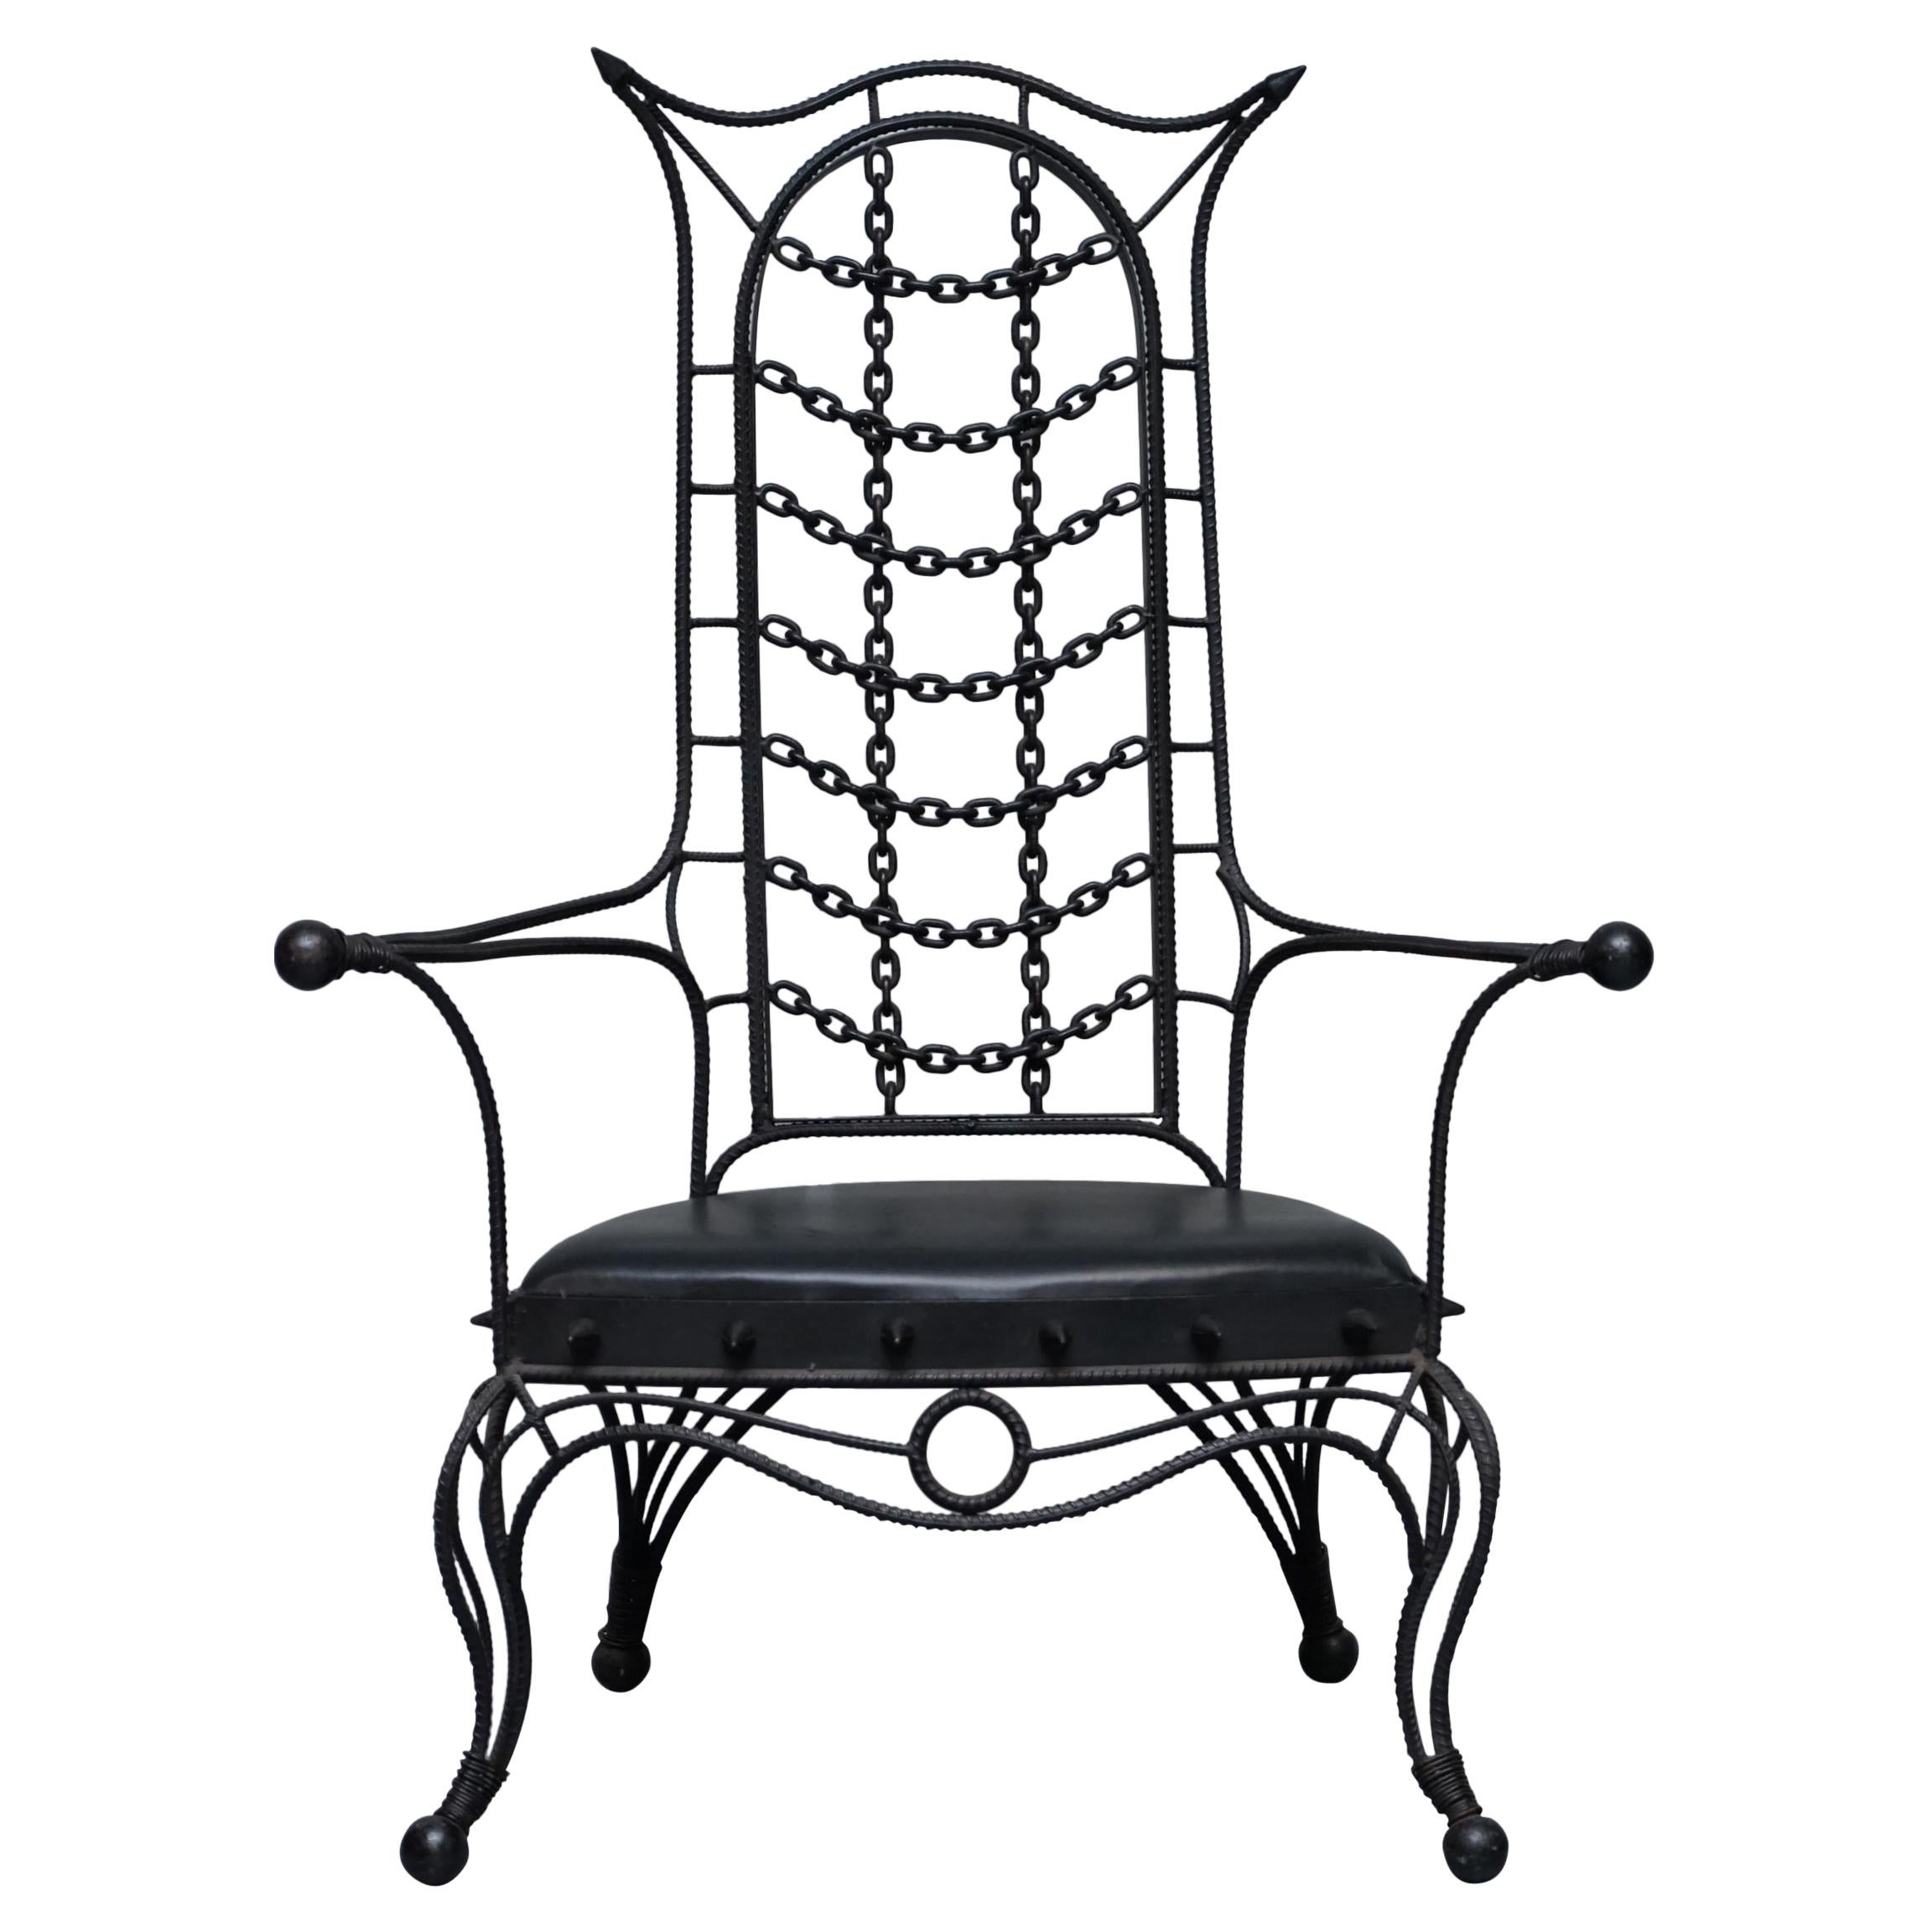 Interesting Iron Workers Gothic Sexy Dungeon Iron Throne Armchair Part Suite For Sale